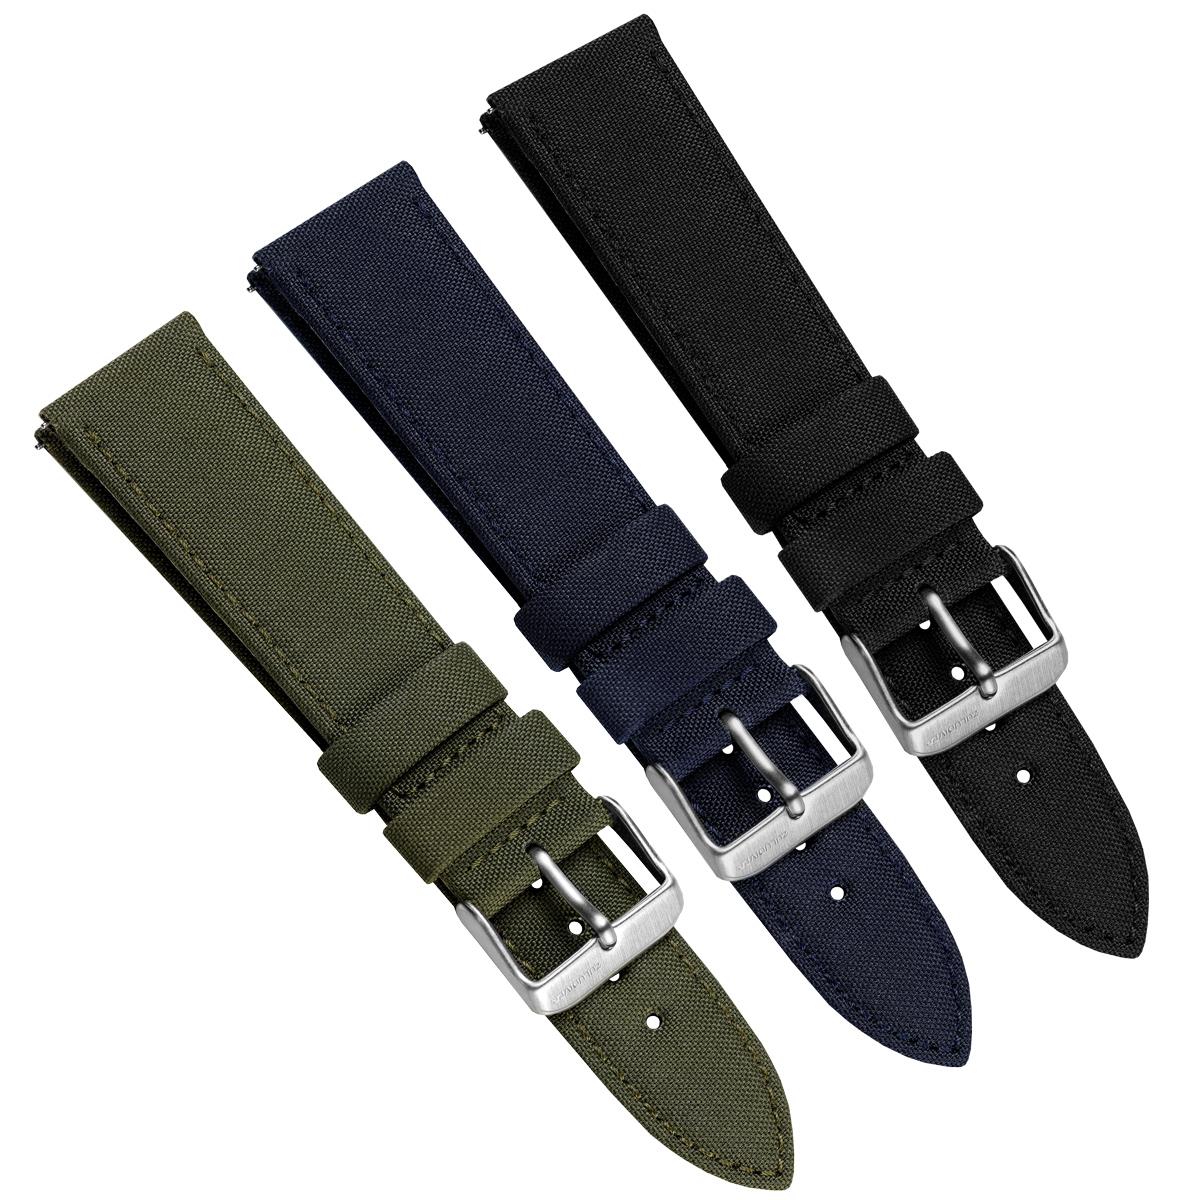 Watch Straps hand made in France  Free Global Shipping with UPS – Molequin